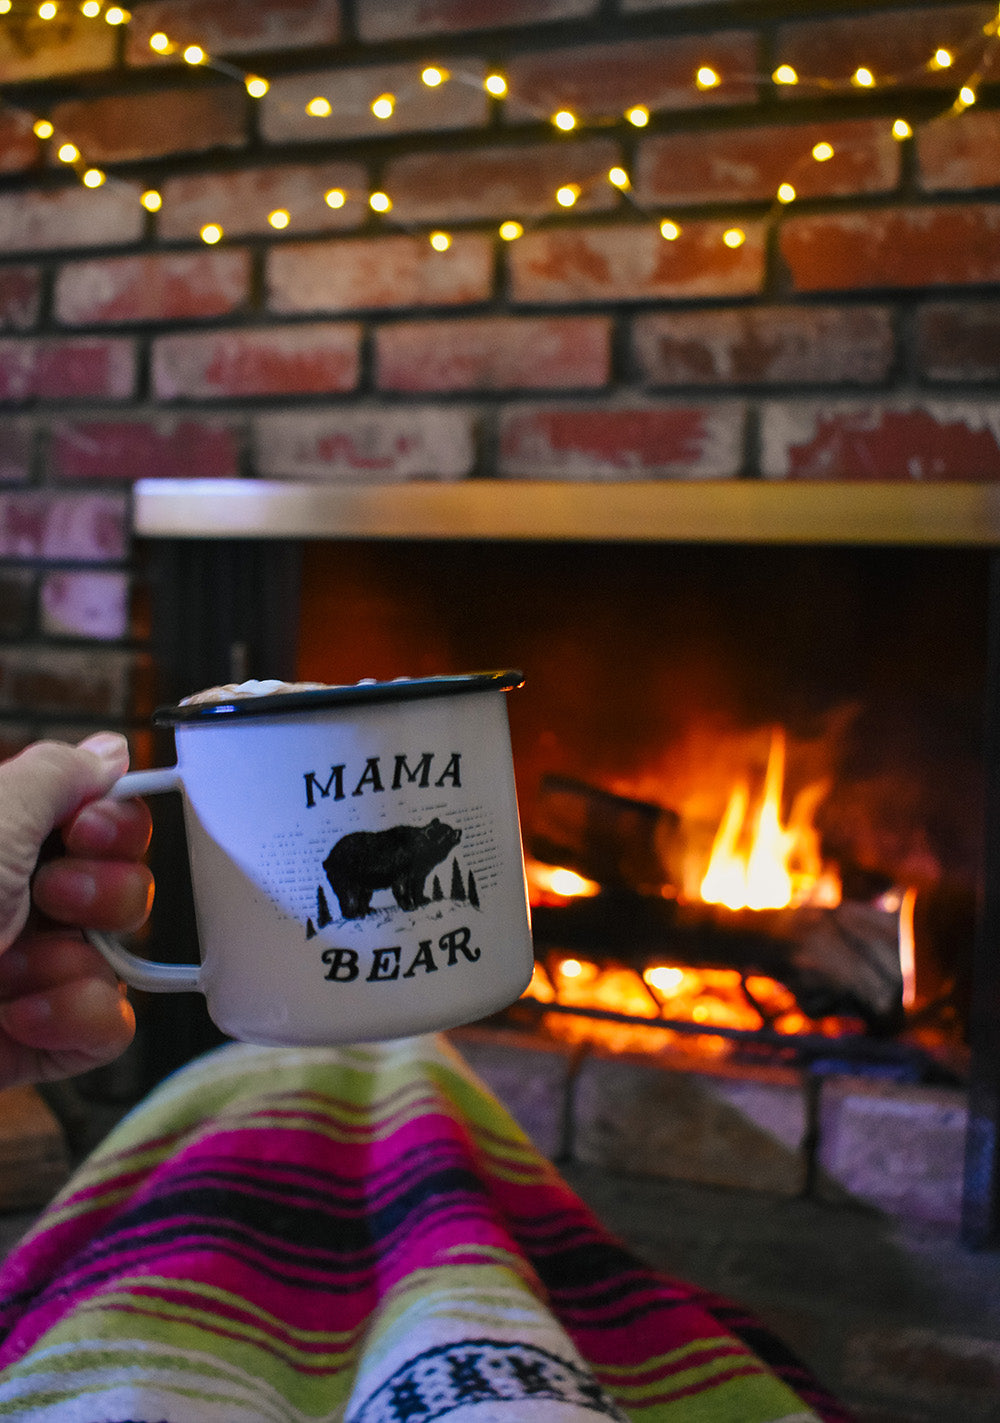 Get cozy by the fire with an Enamel Camp Mug filled with a hot cup of cocoa (with extra marshmallows of course!) while snuggled under a Bohemian Fiesta Blanket. Forget the cold, gloomy weather outside by gazing into the fire and pretending to be by the firepit at your favorite campground, relaxing after a fun filled day of hiking the mountain trails with your best friend. 